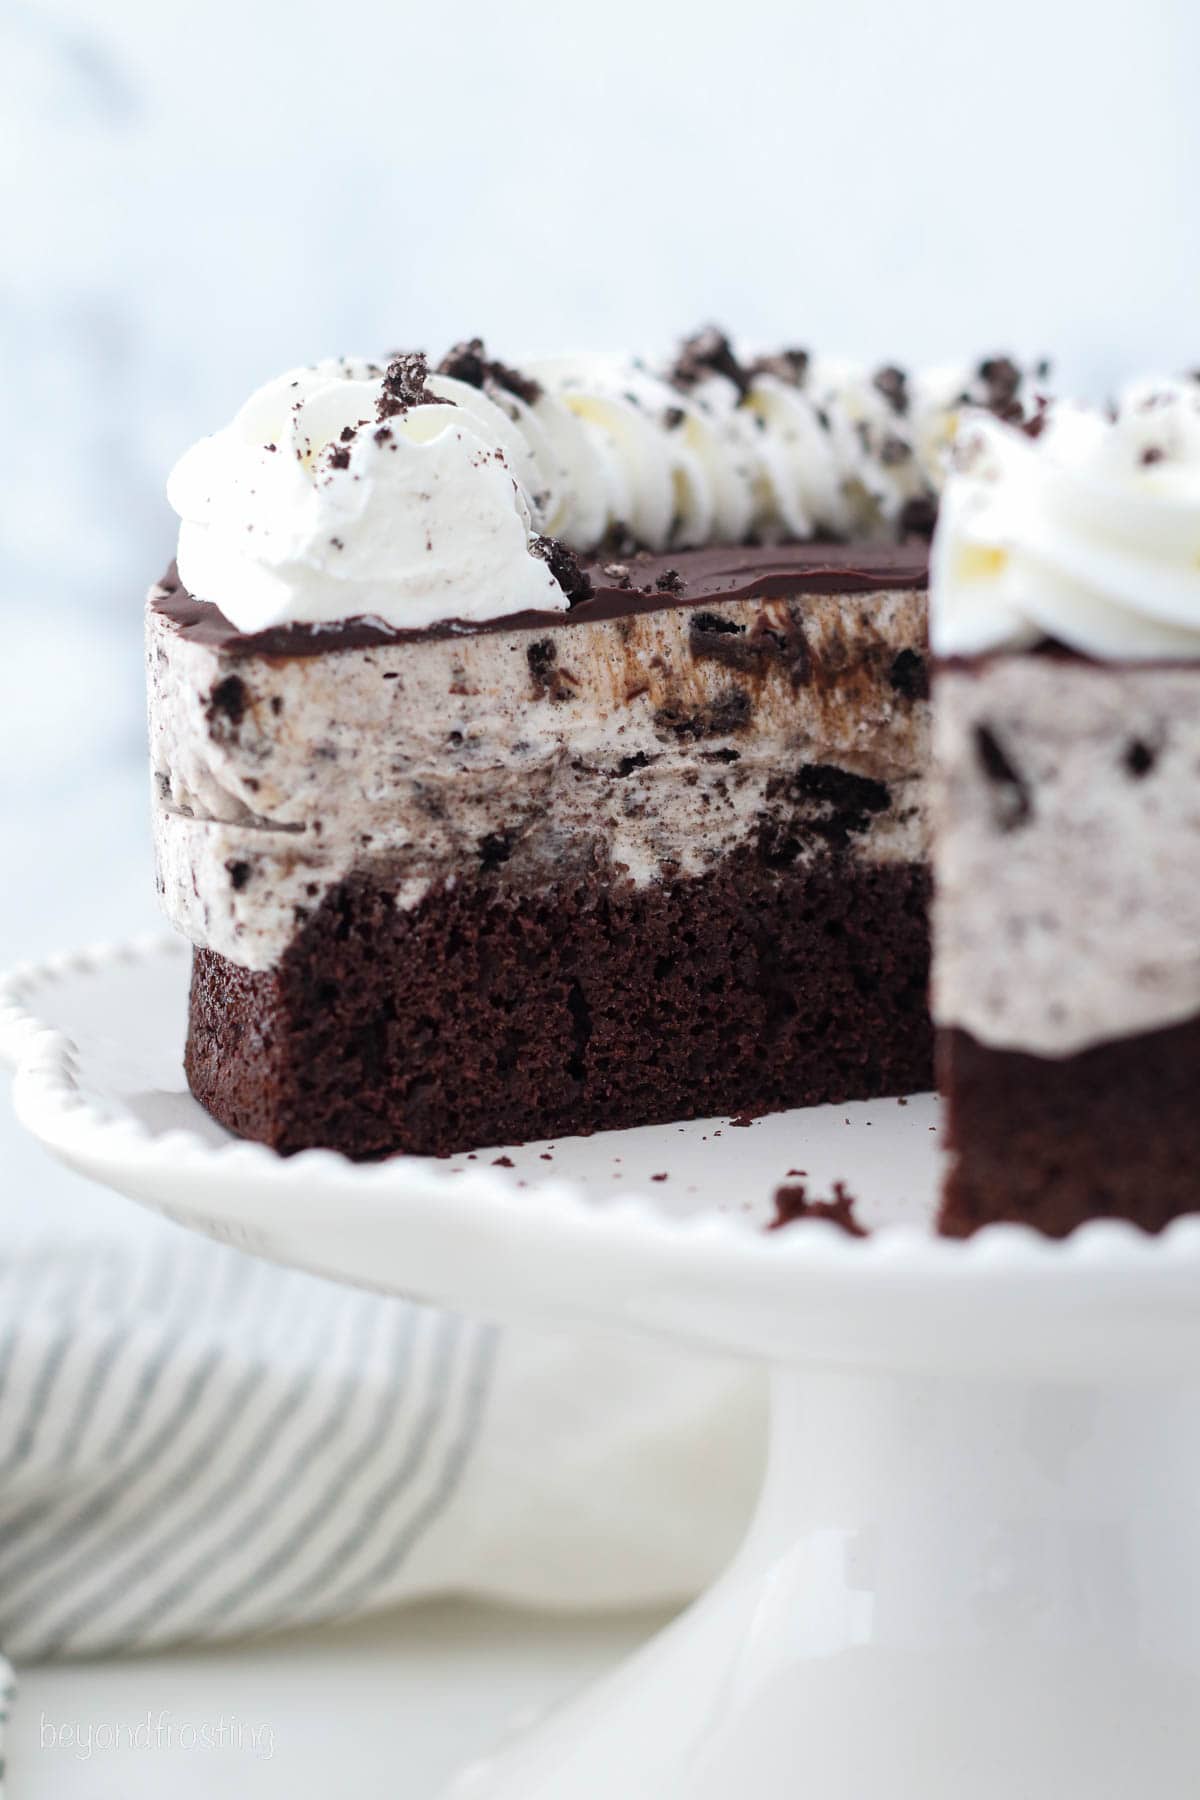 Oreo ice cream cake topped with whipped cream on a cake stand, with a slice missing.